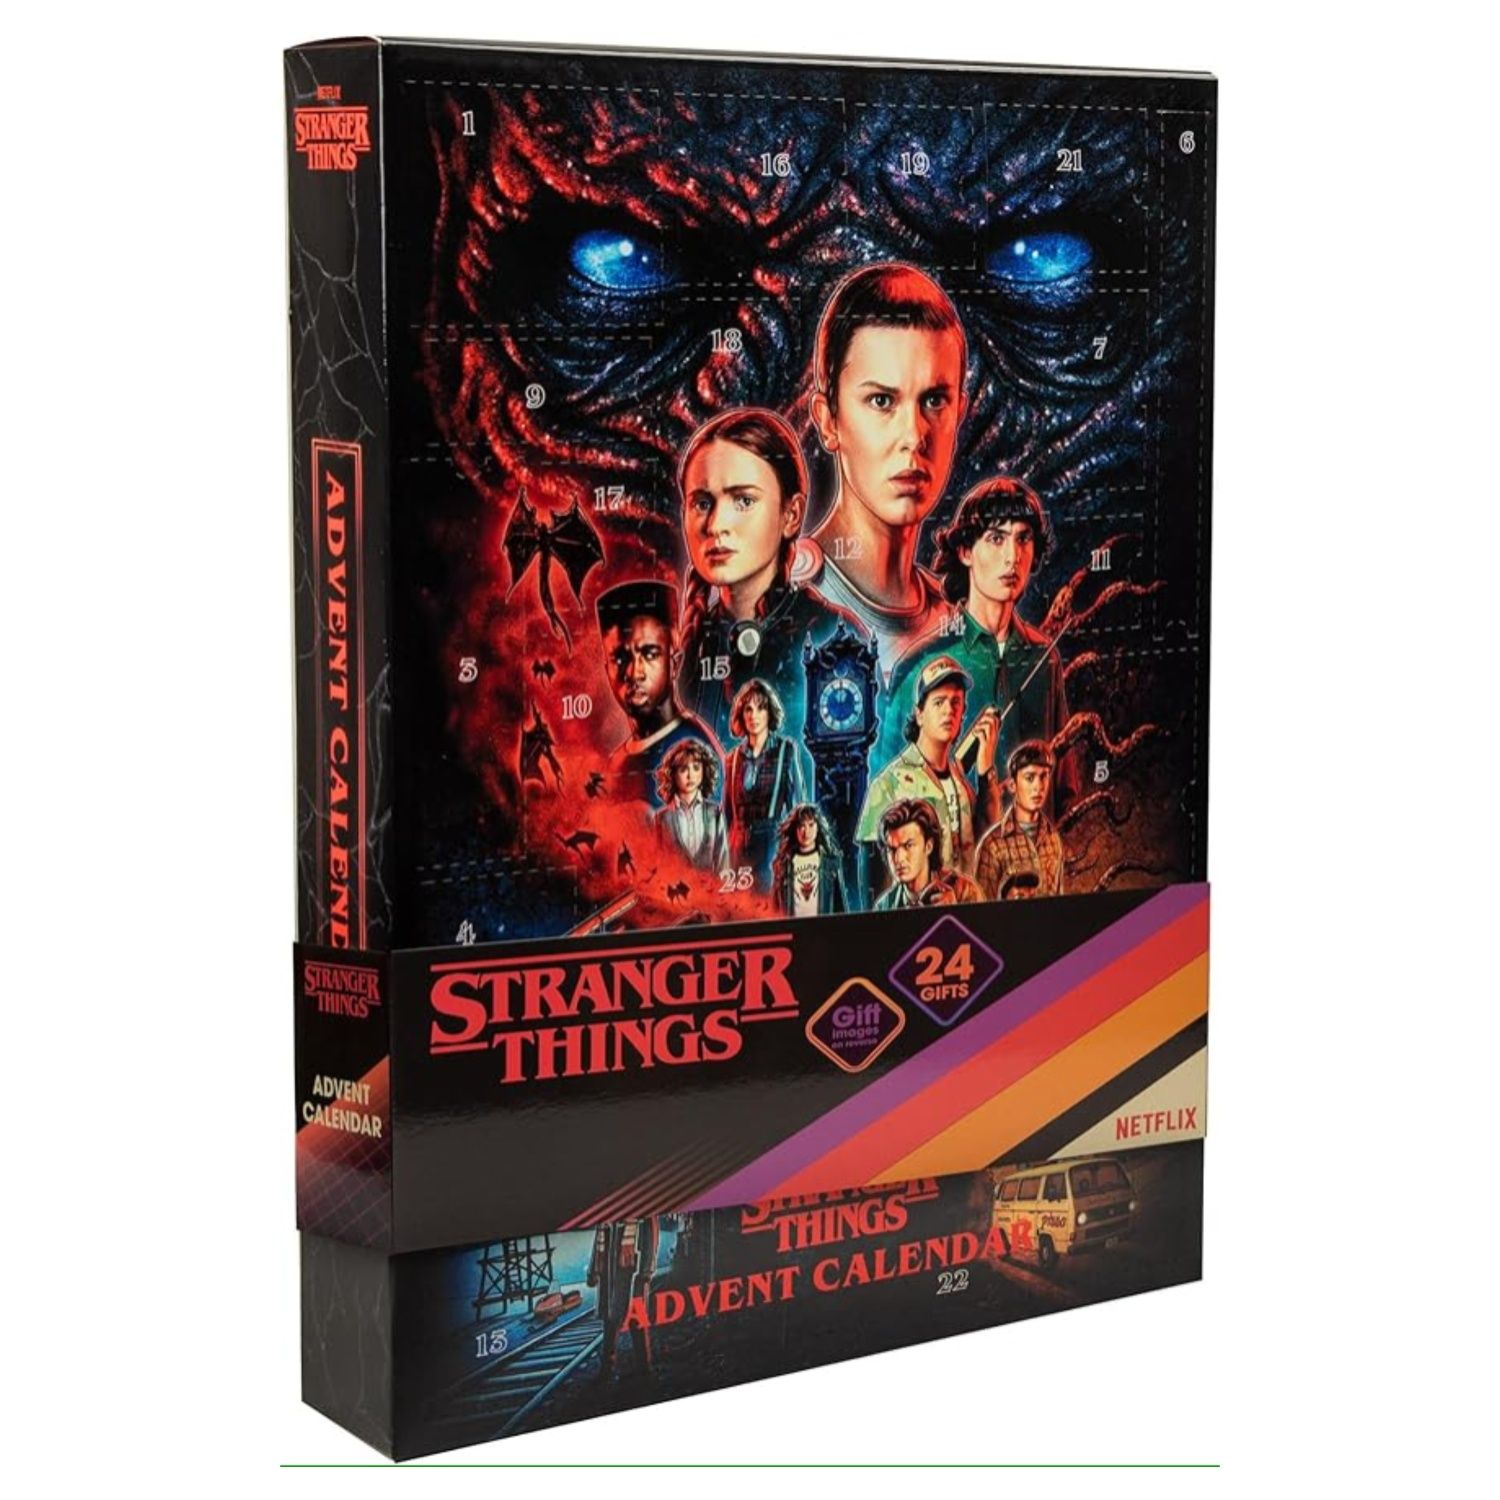 This product is an advent calendar with Stranger Things characters printed on the front.